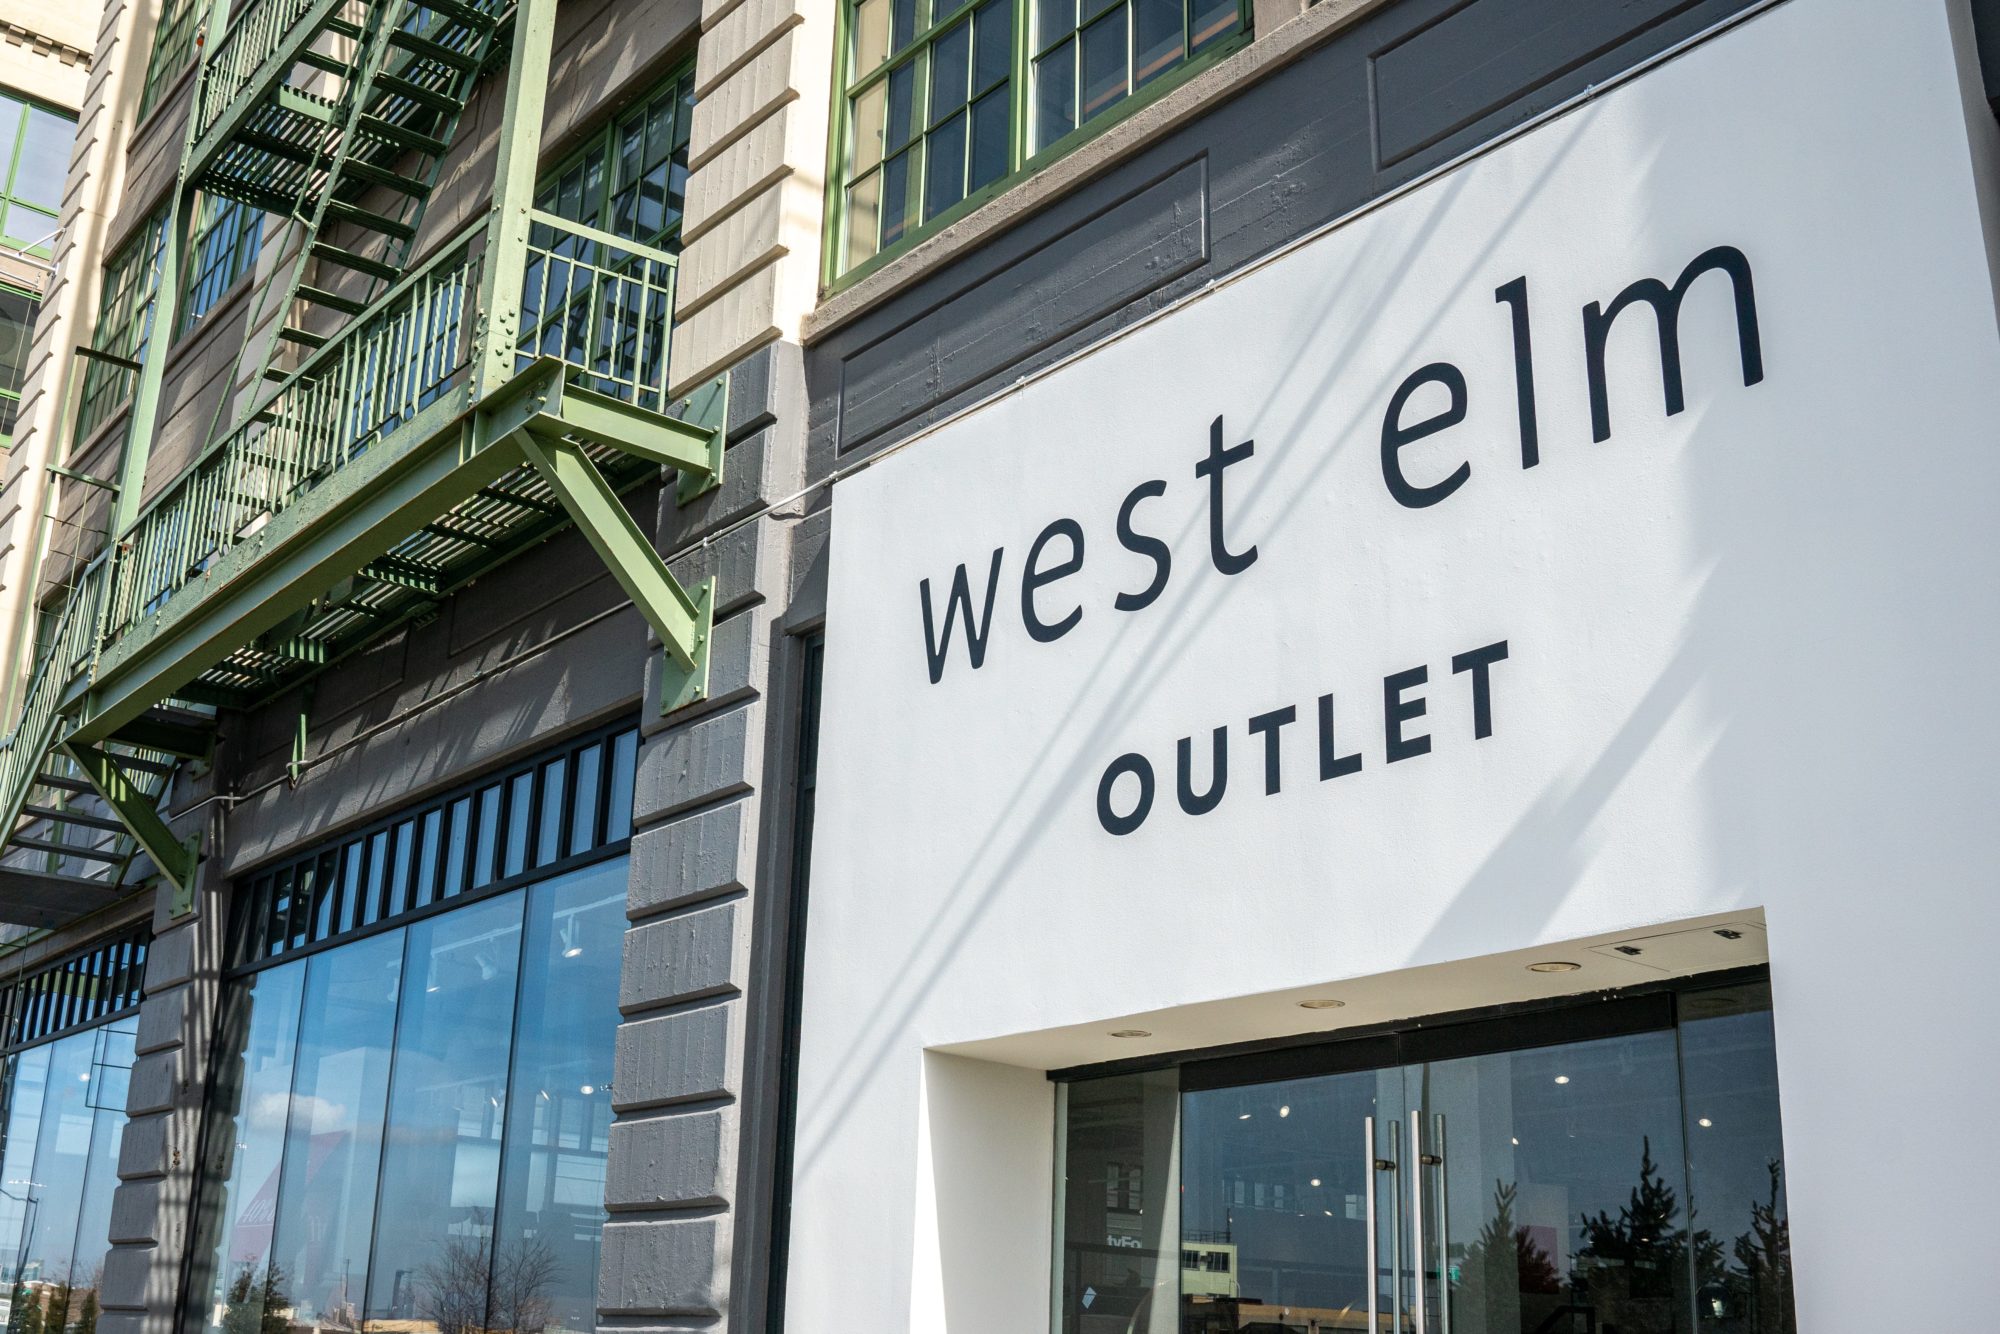 West Elm Opens Outlet Store At Industry City